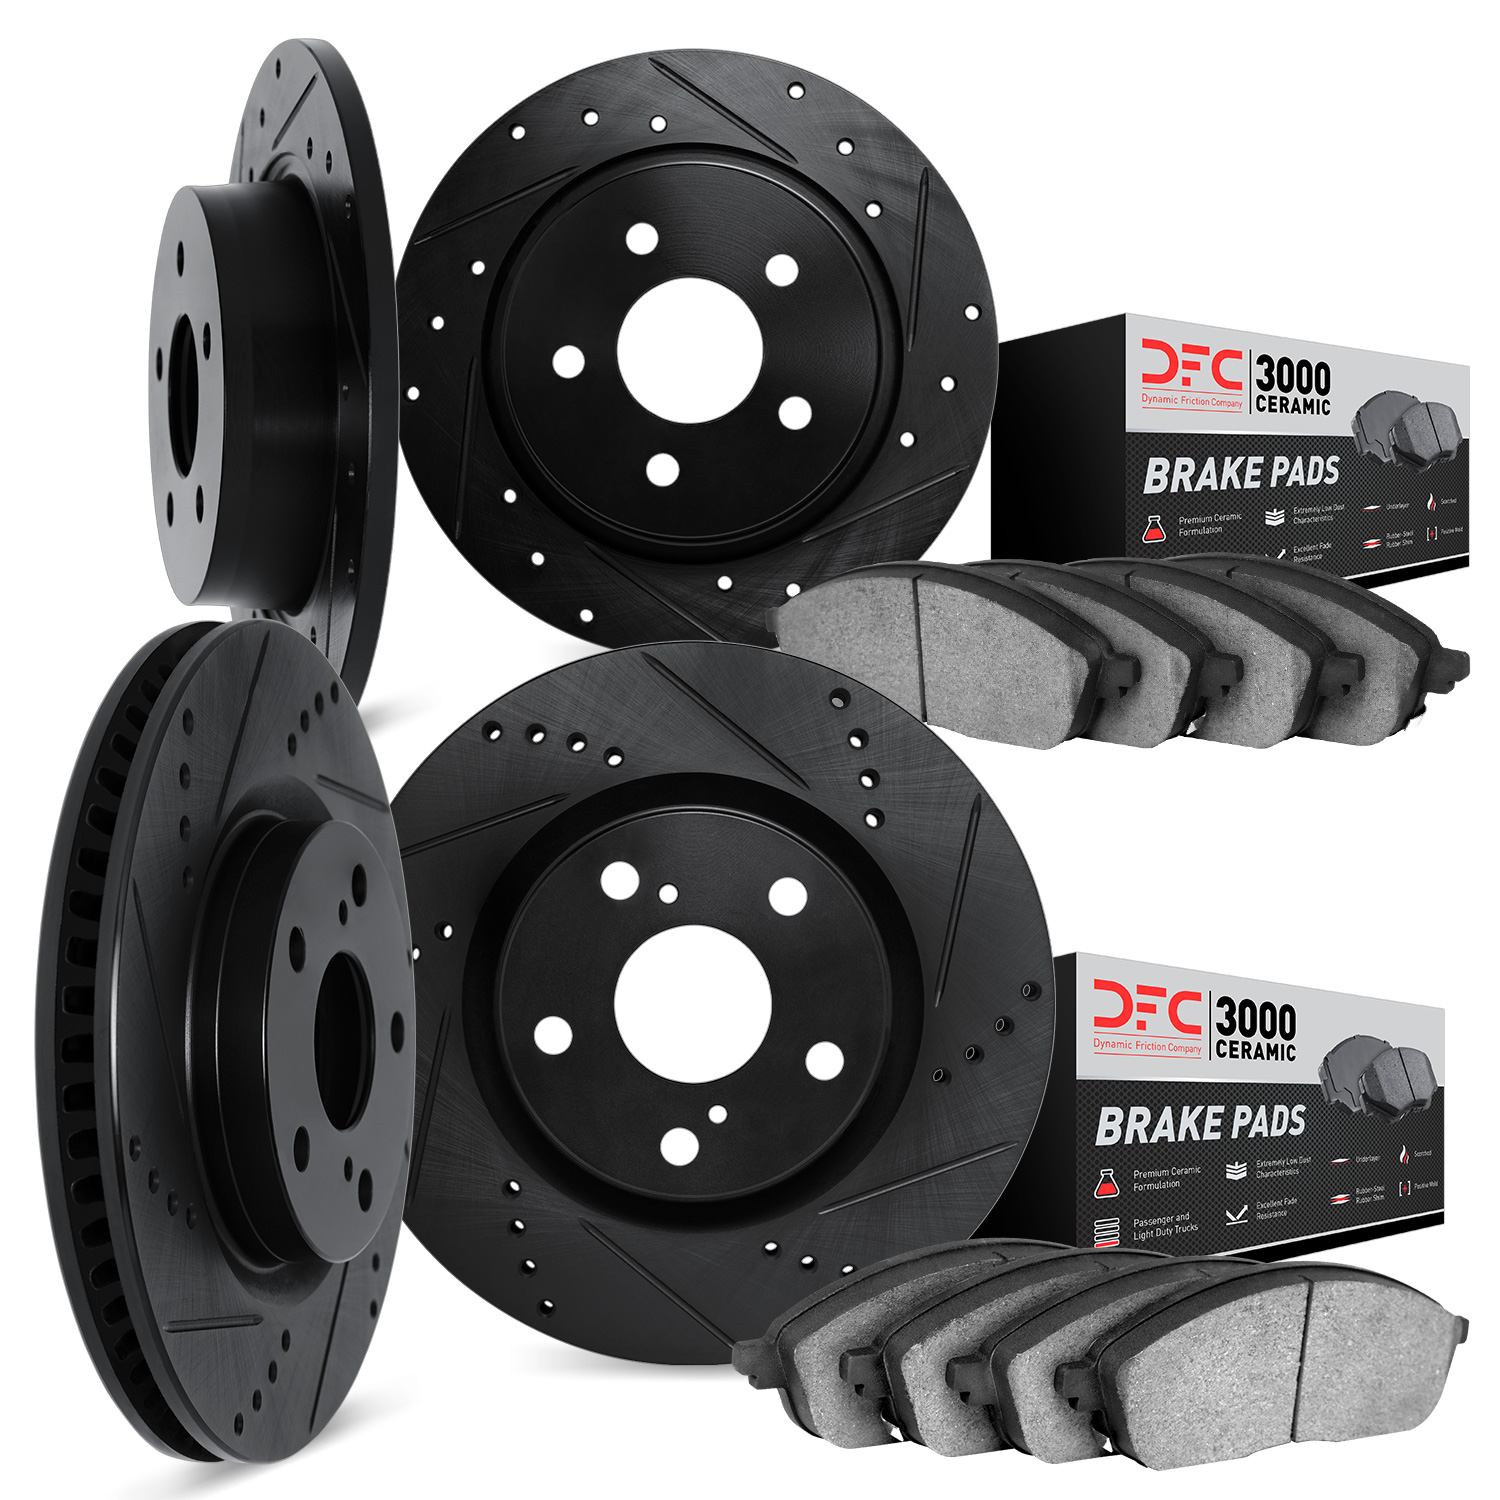 8304-39009 Drilled/Slotted Brake Rotors with 3000-Series Ceramic Brake Pads Kit [Black], 2004-2005 Mopar, Position: Front and Re